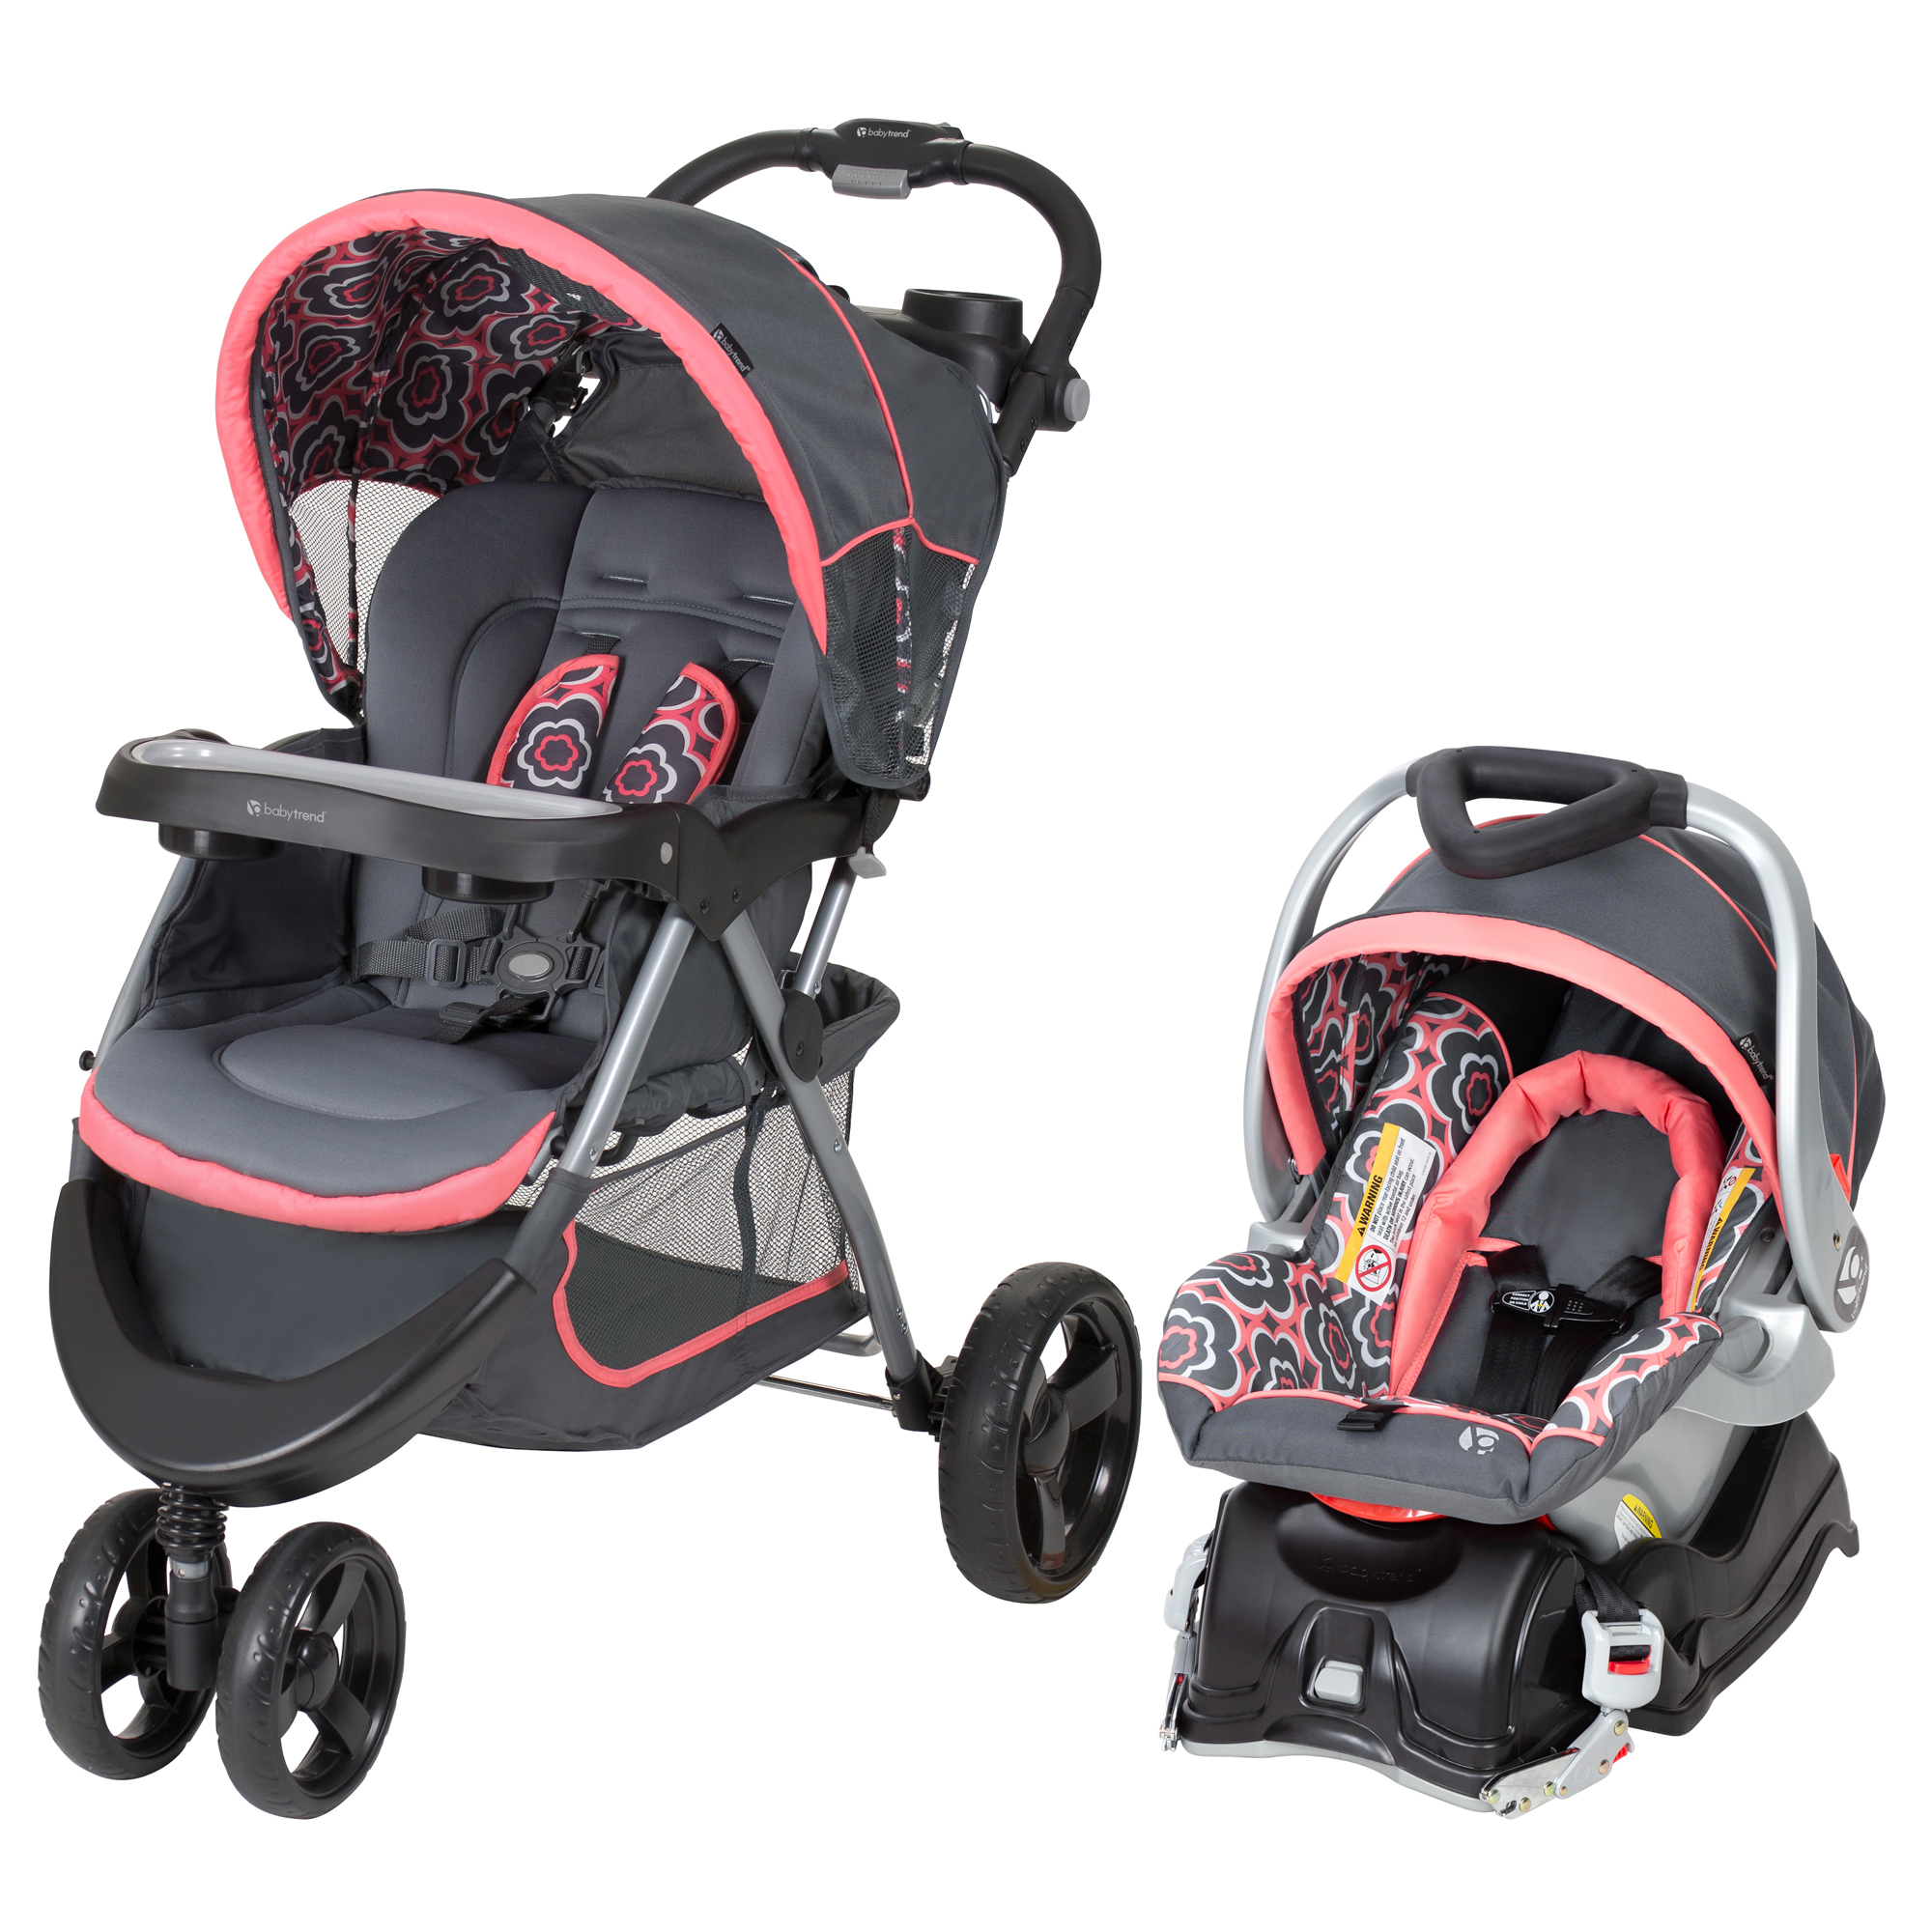 Baby Trend Nexton Travel System Stroller, Coral Floral - image 1 of 7